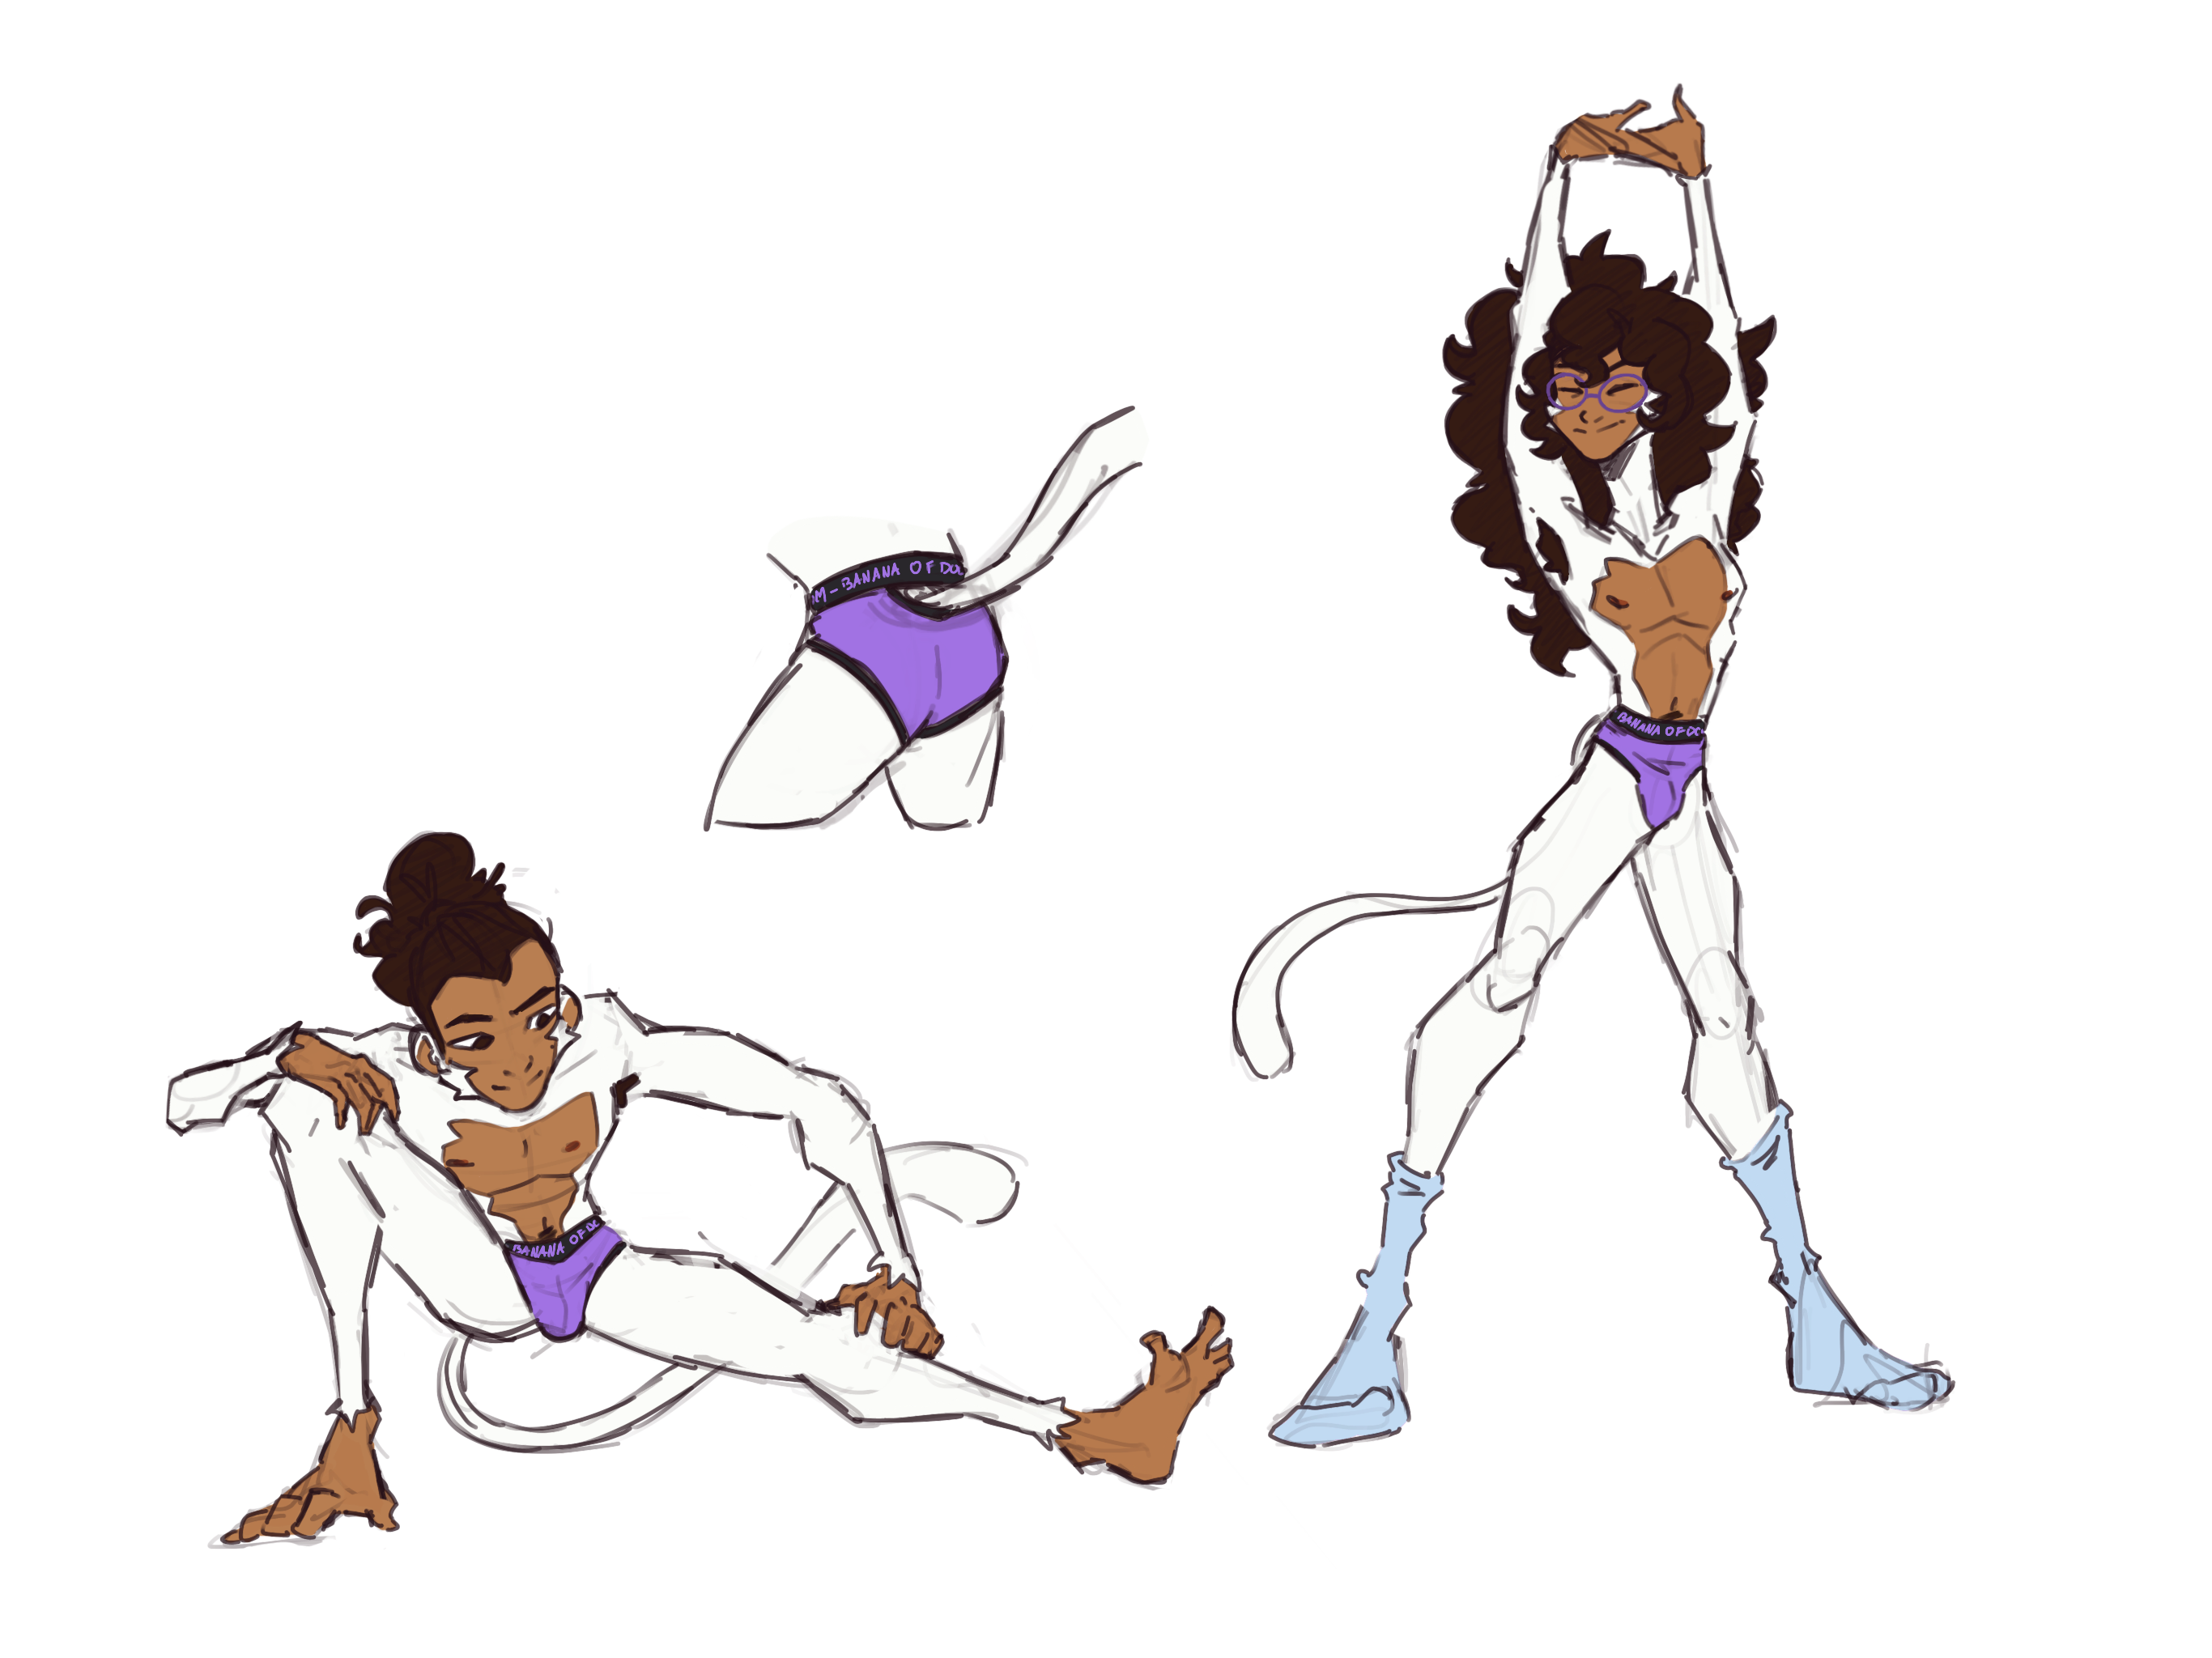 1656090302.chaoskirby_marley_stretchy_sketches